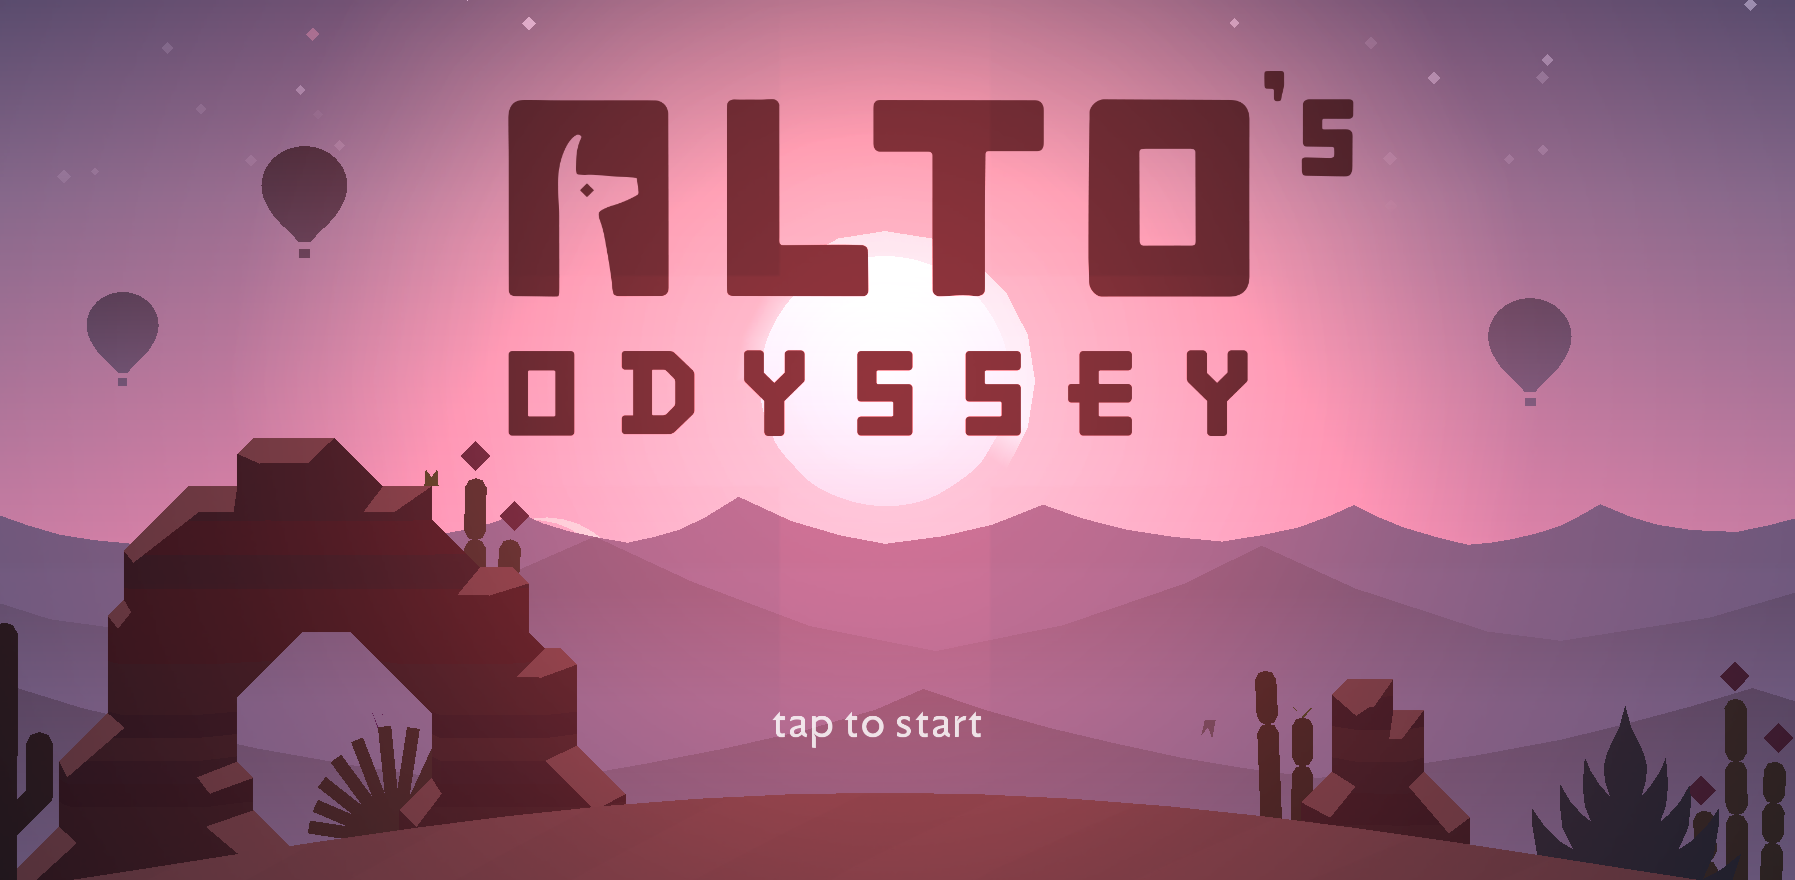 Getting started with Alto's Odyssey